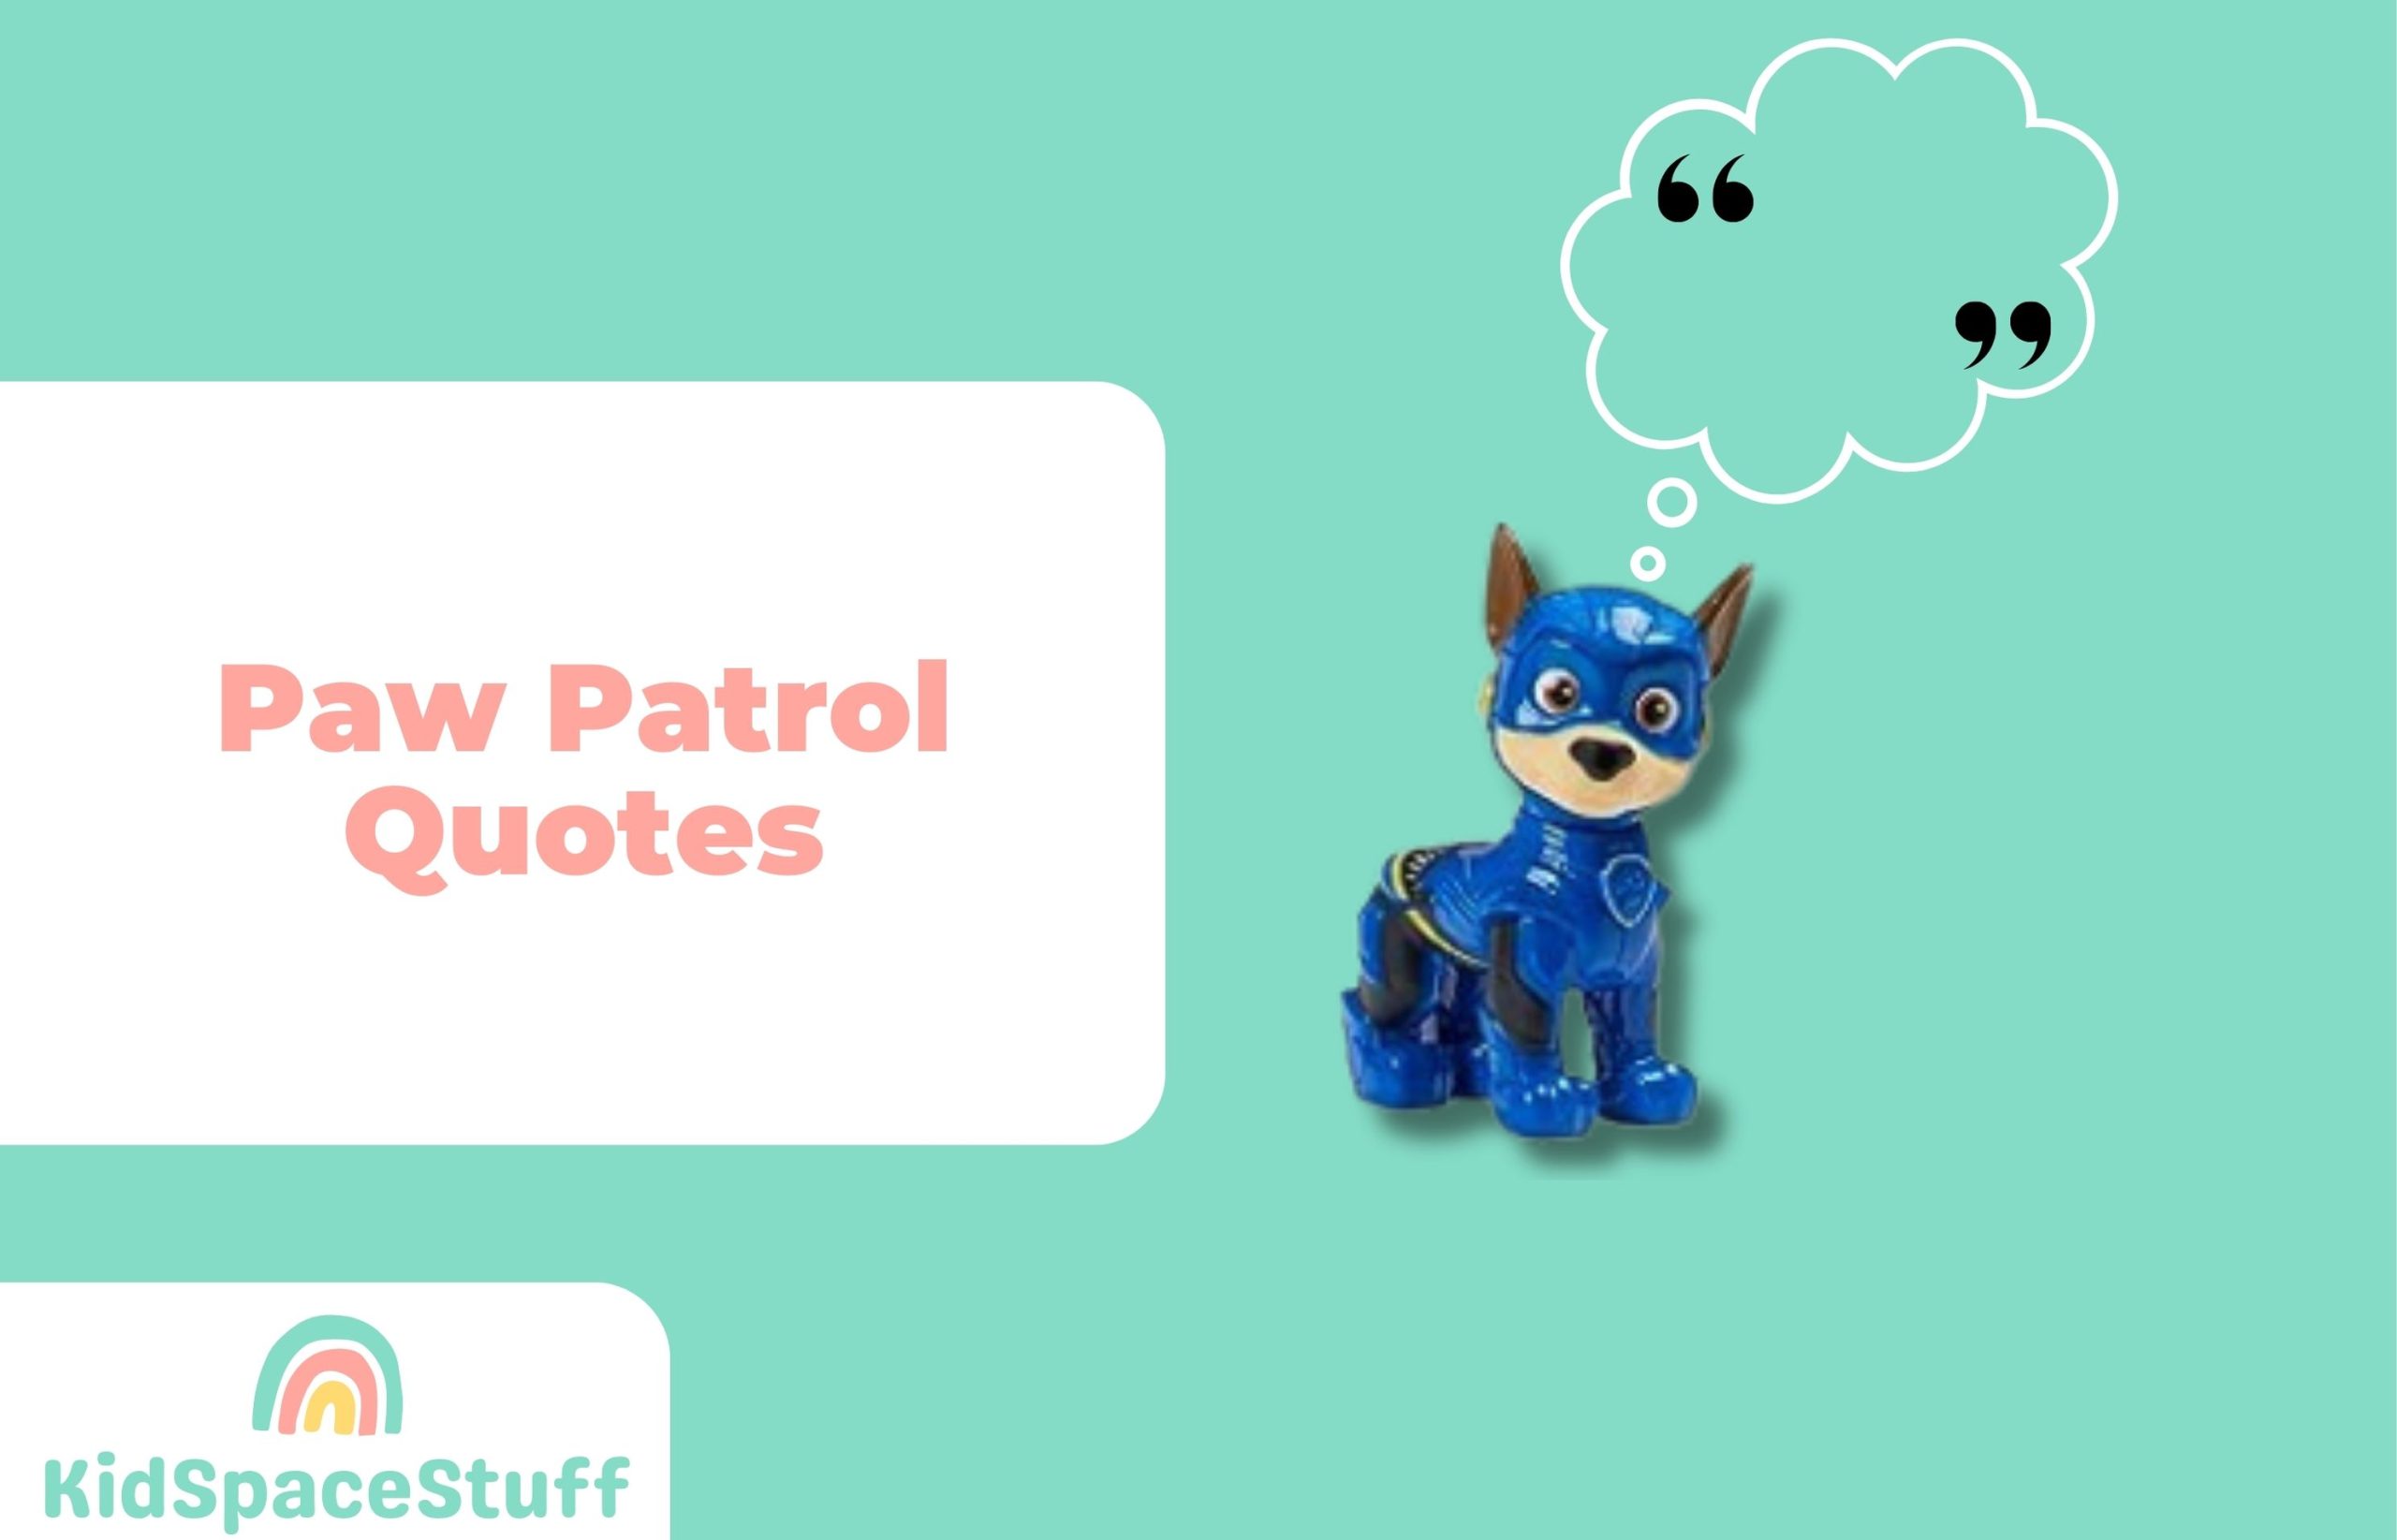 50 Paw Patrol Quotes (Funny & Motivational Quotes!)